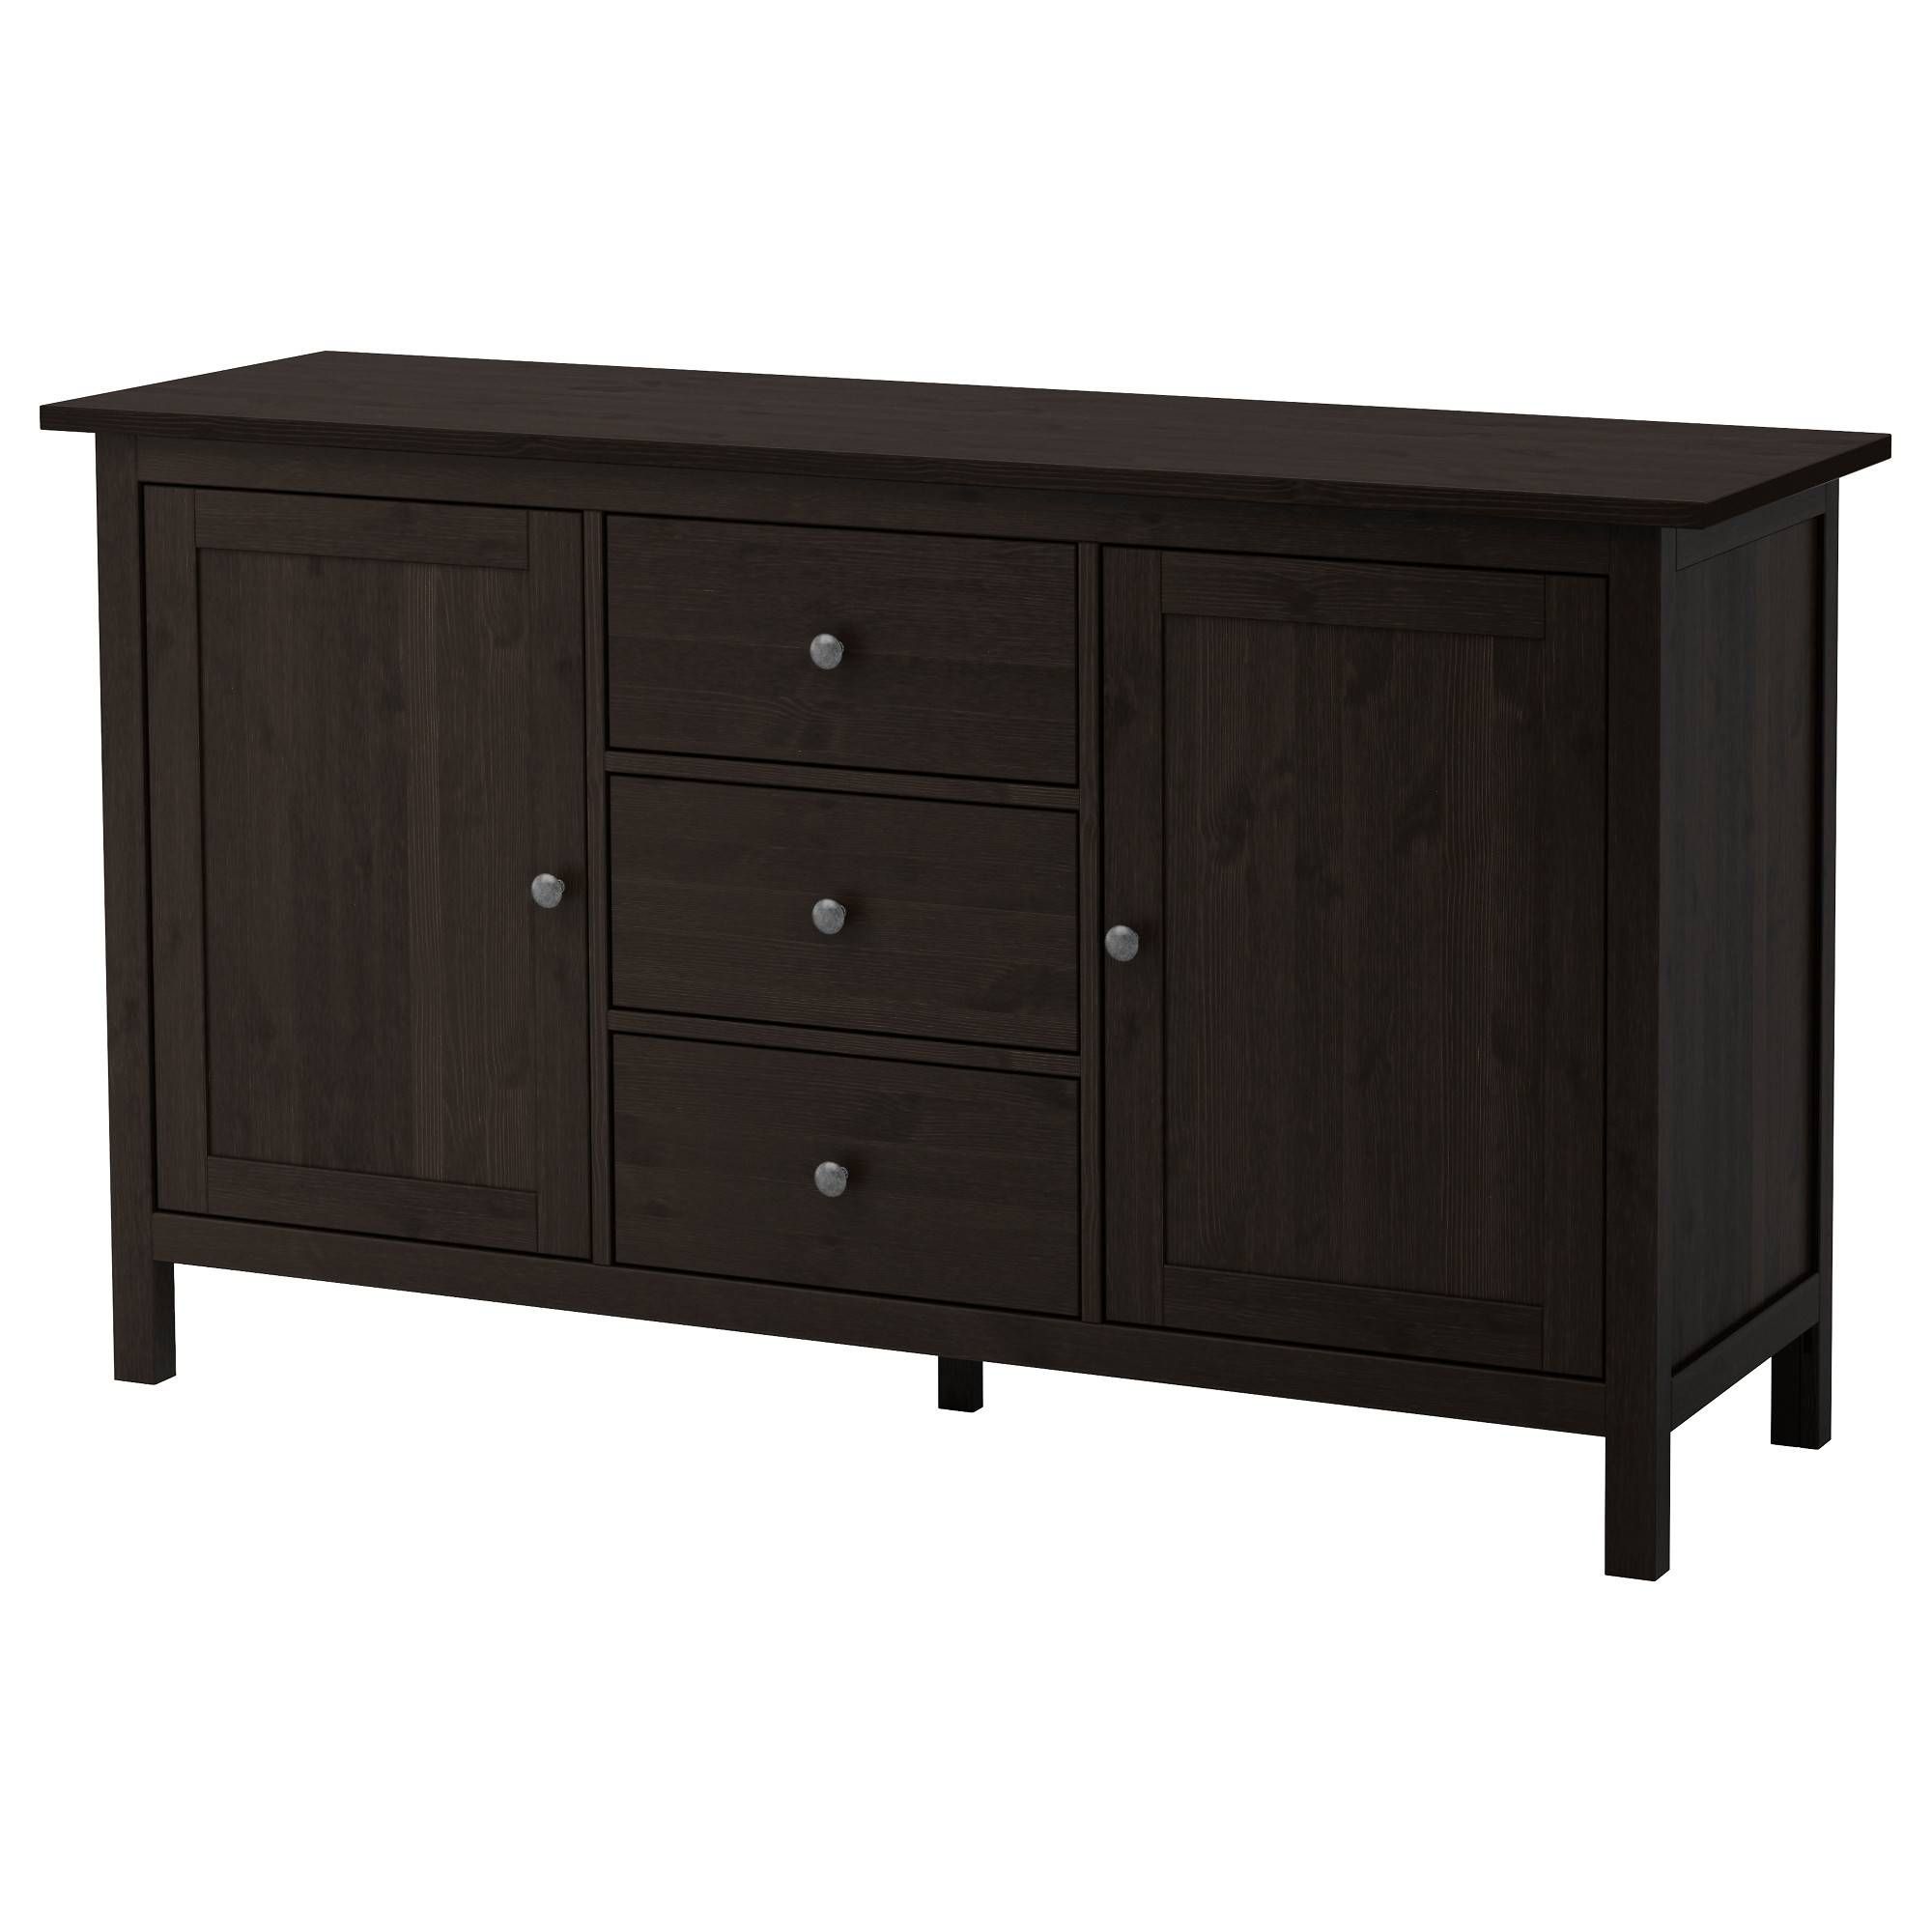 Dining Room Sideboards & Buffet Cabinets – Ikea Inside Black Sideboard Cabinets (View 7 of 15)